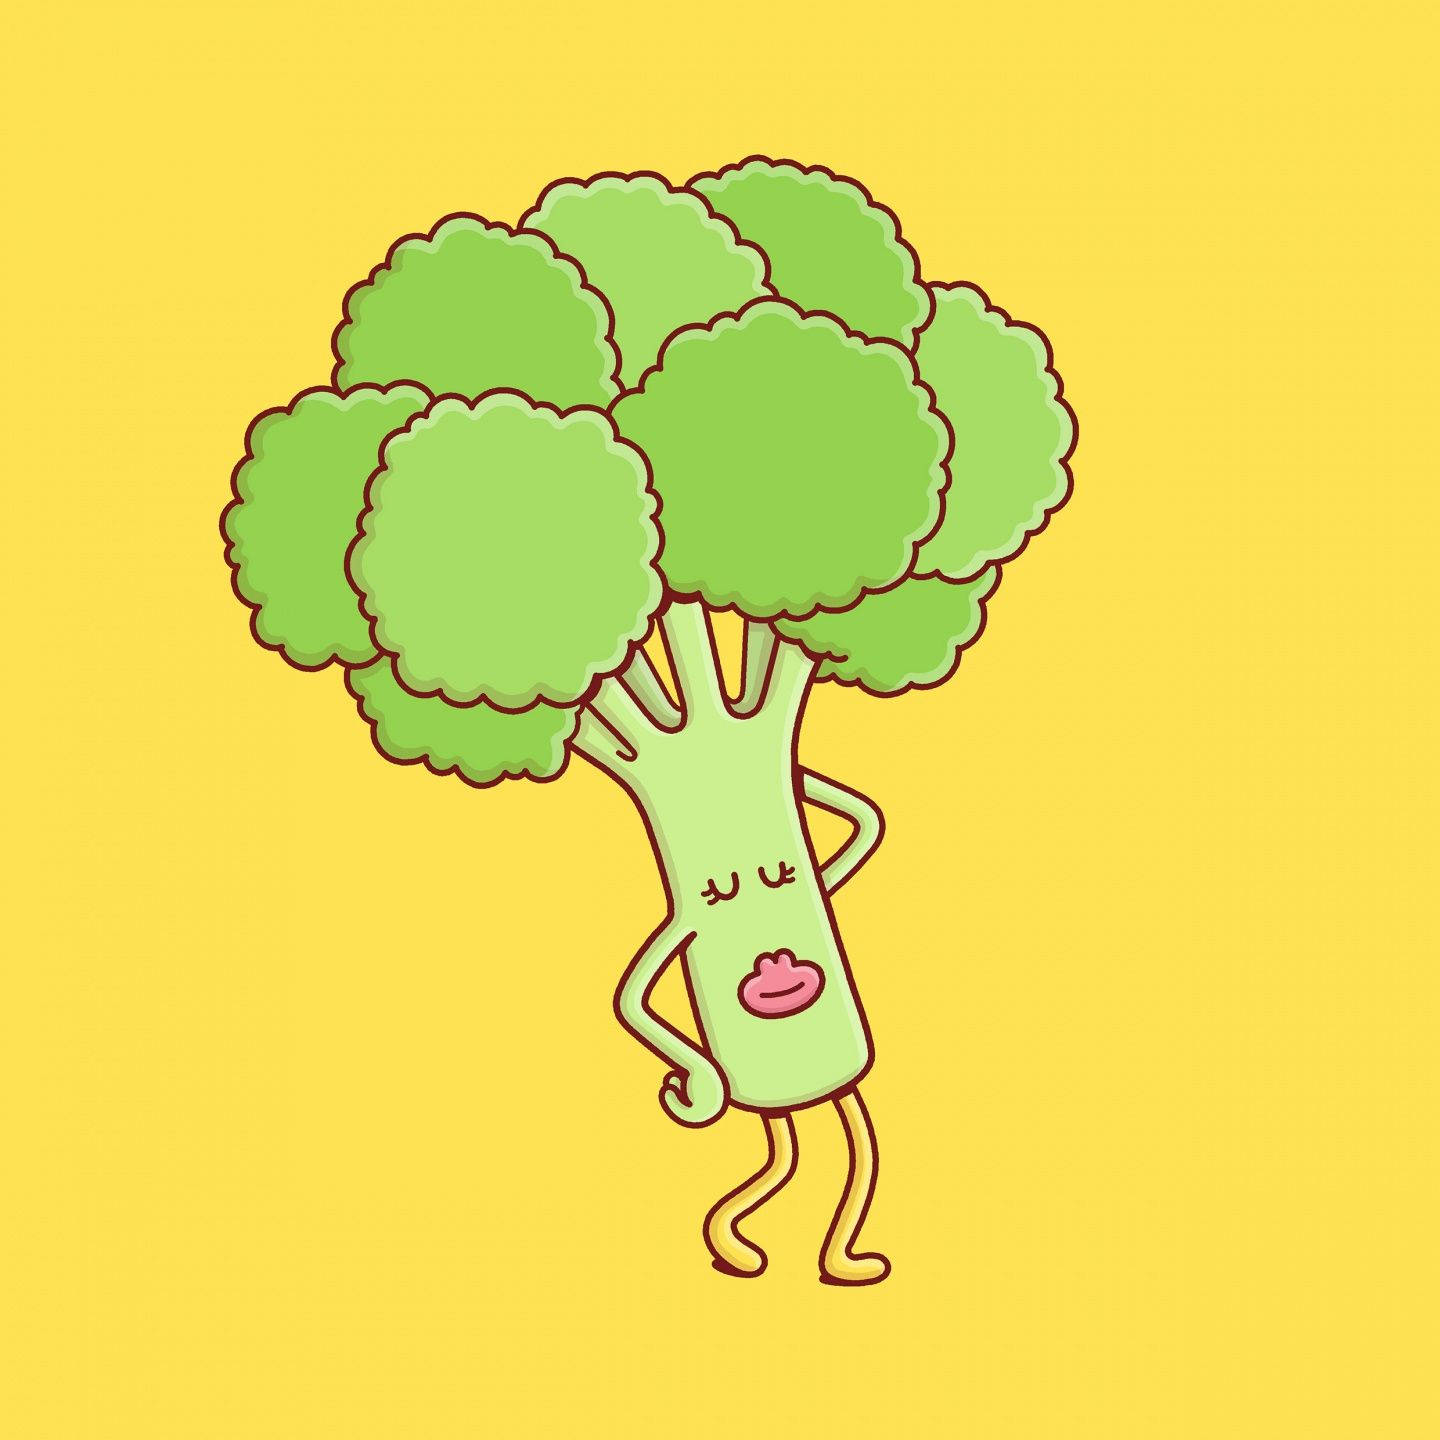 Broccoli With Annoying Face